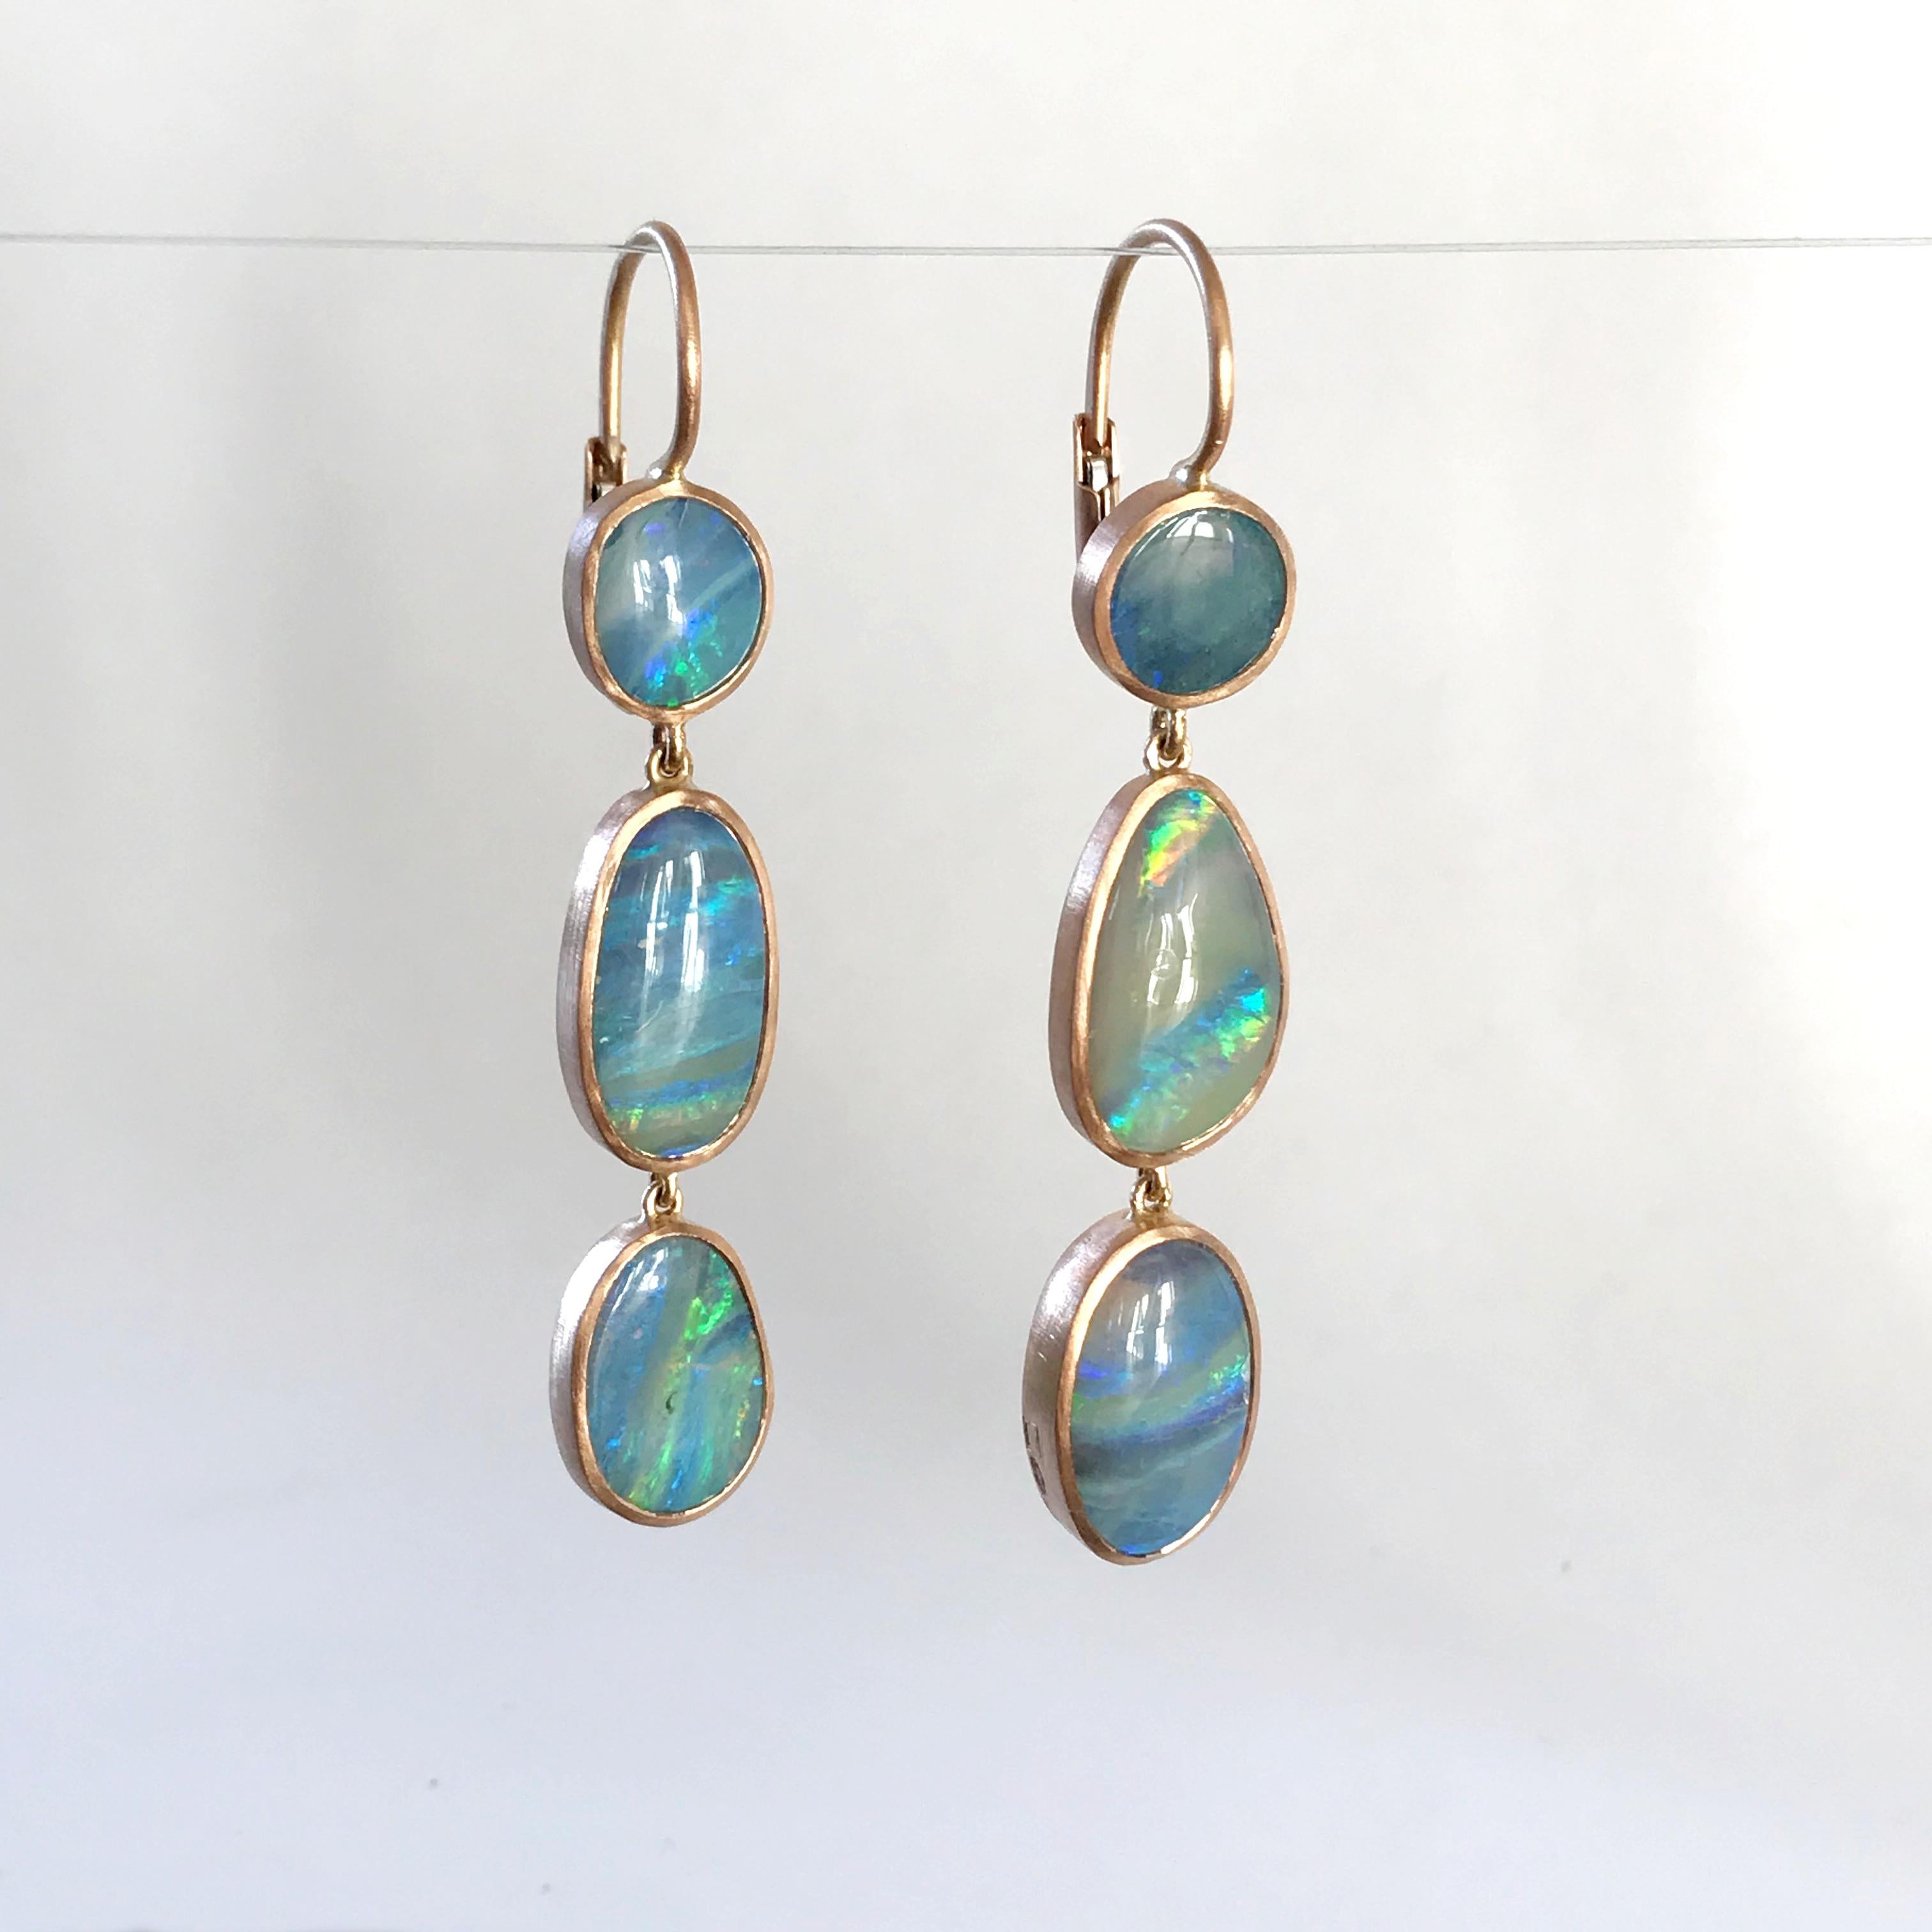 Dalben design One of a kind 18k rose gold matte finishing dangle earrings with six light blue- green bezel set Australian Boulder Opals weighing 12,55 carats.  
max width 9,2 mm 
height without leverback 40 mm
height with leverback 48 mm  
The